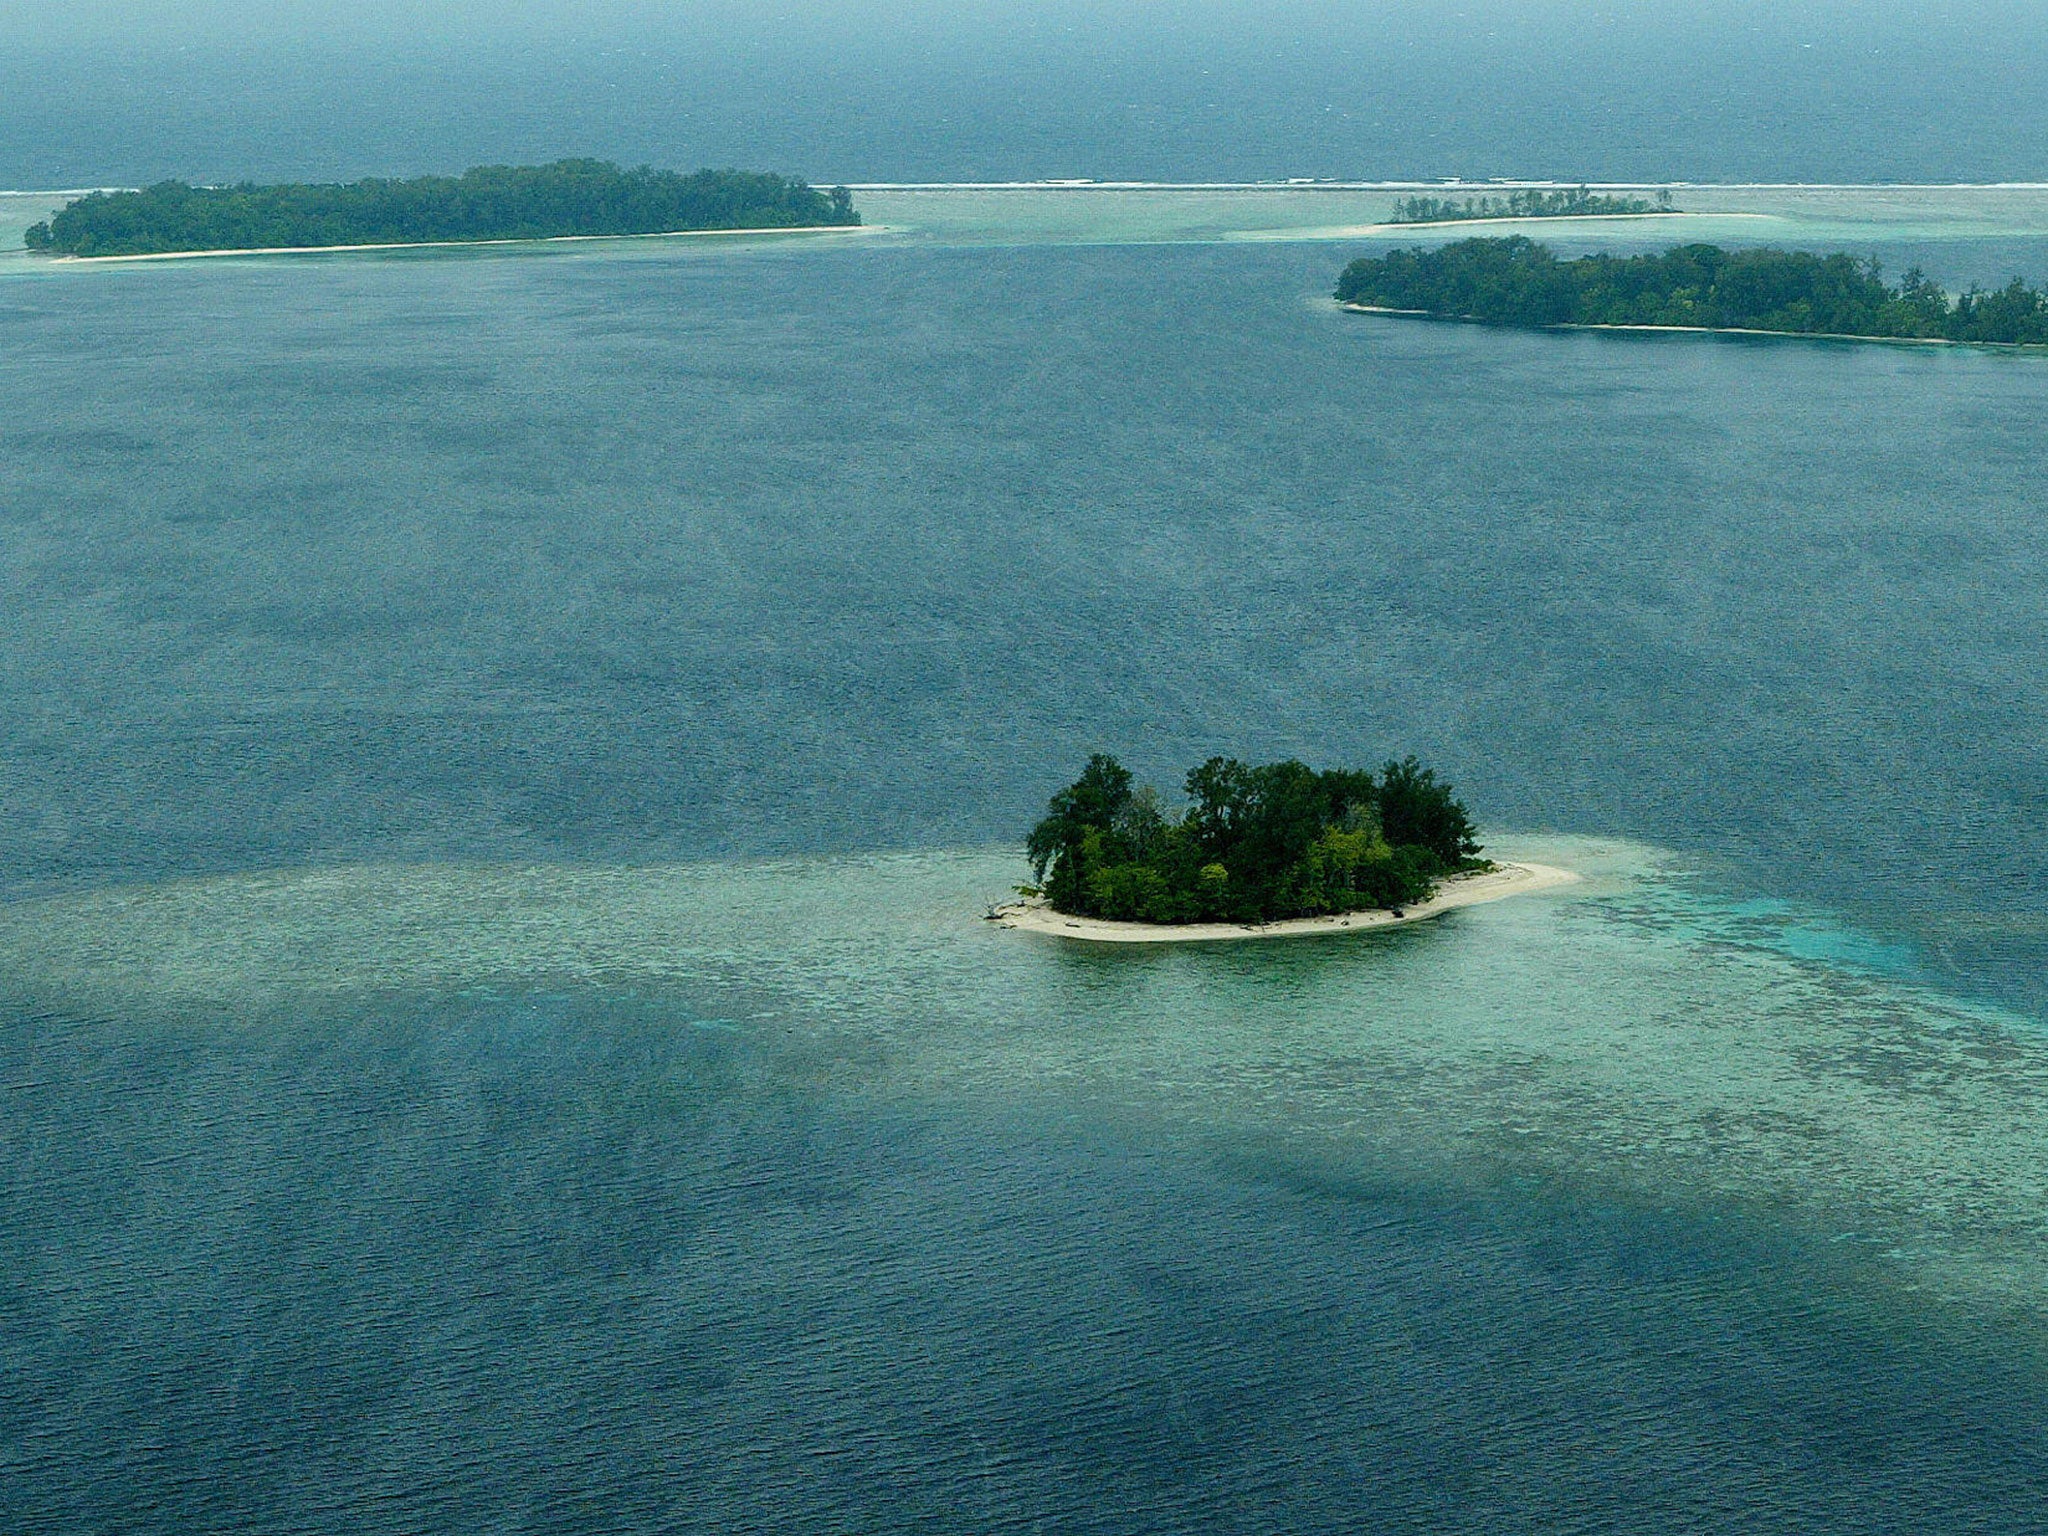 Honiara is the capital of the Solomon Islands